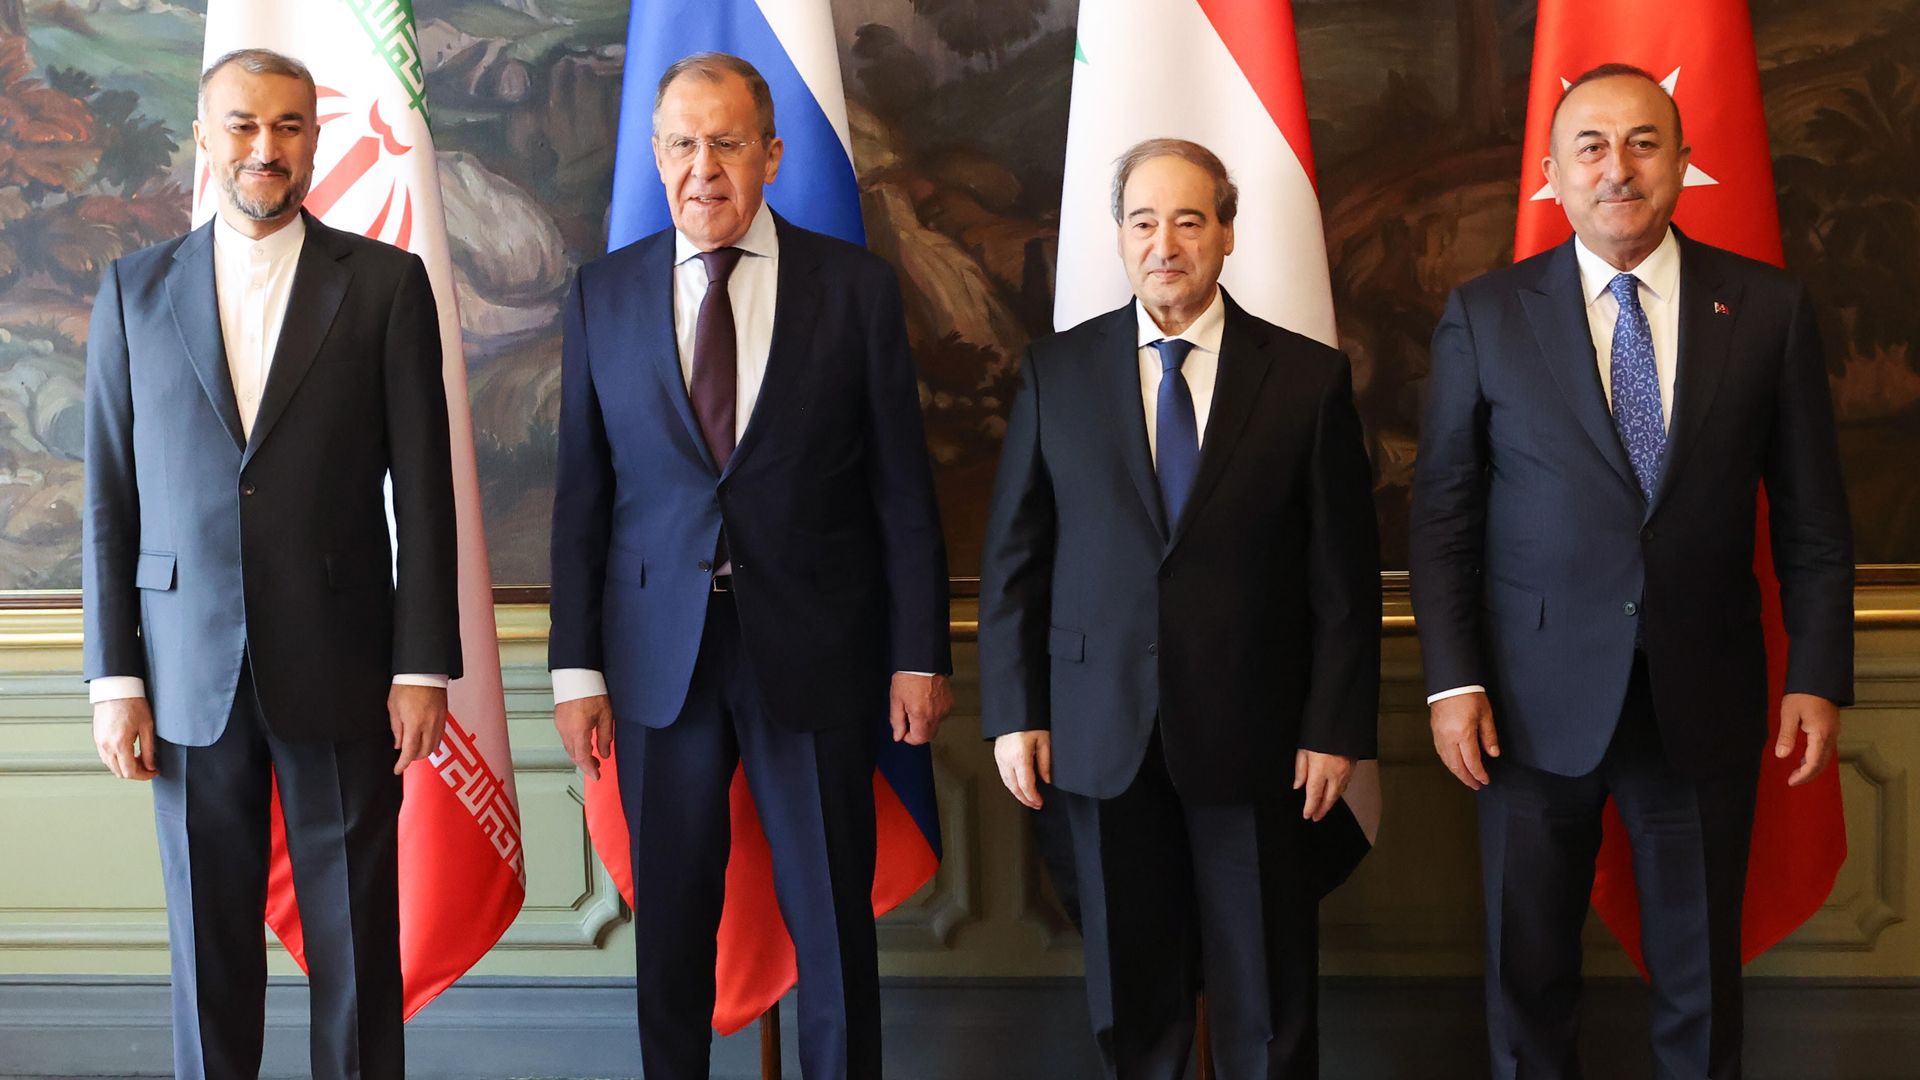 The foreign ministers of Iran, Russia, Syria and Turkey meet in Moscow on May 10.